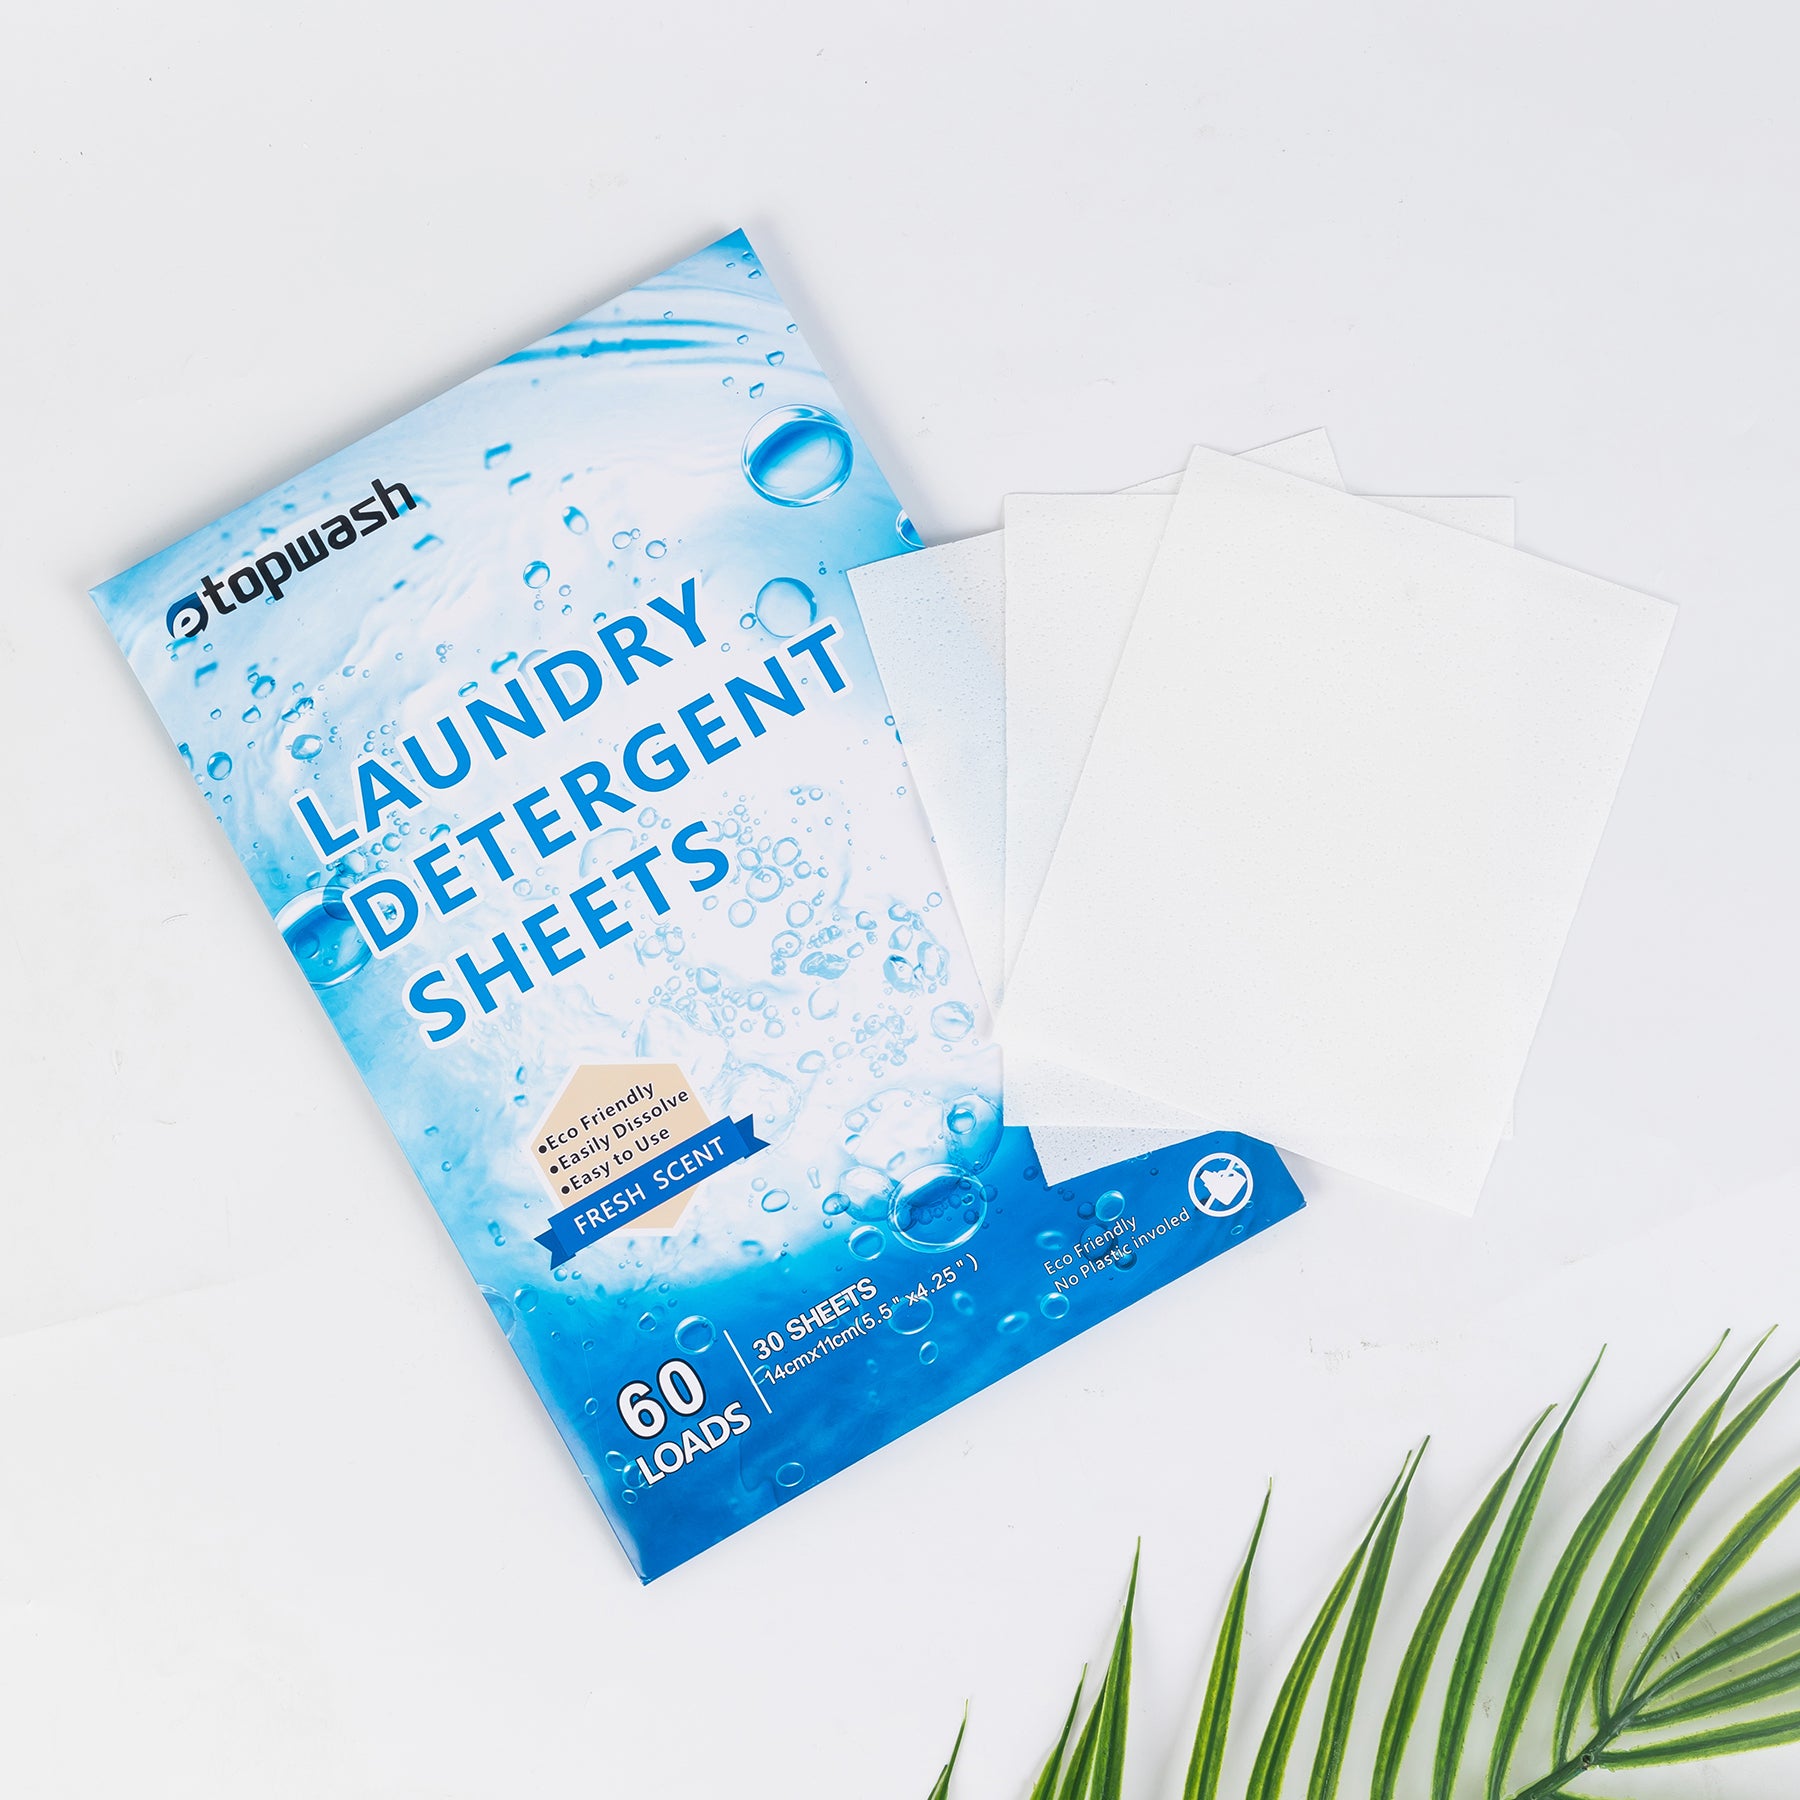 Eco-Friendly Detergent Sheets